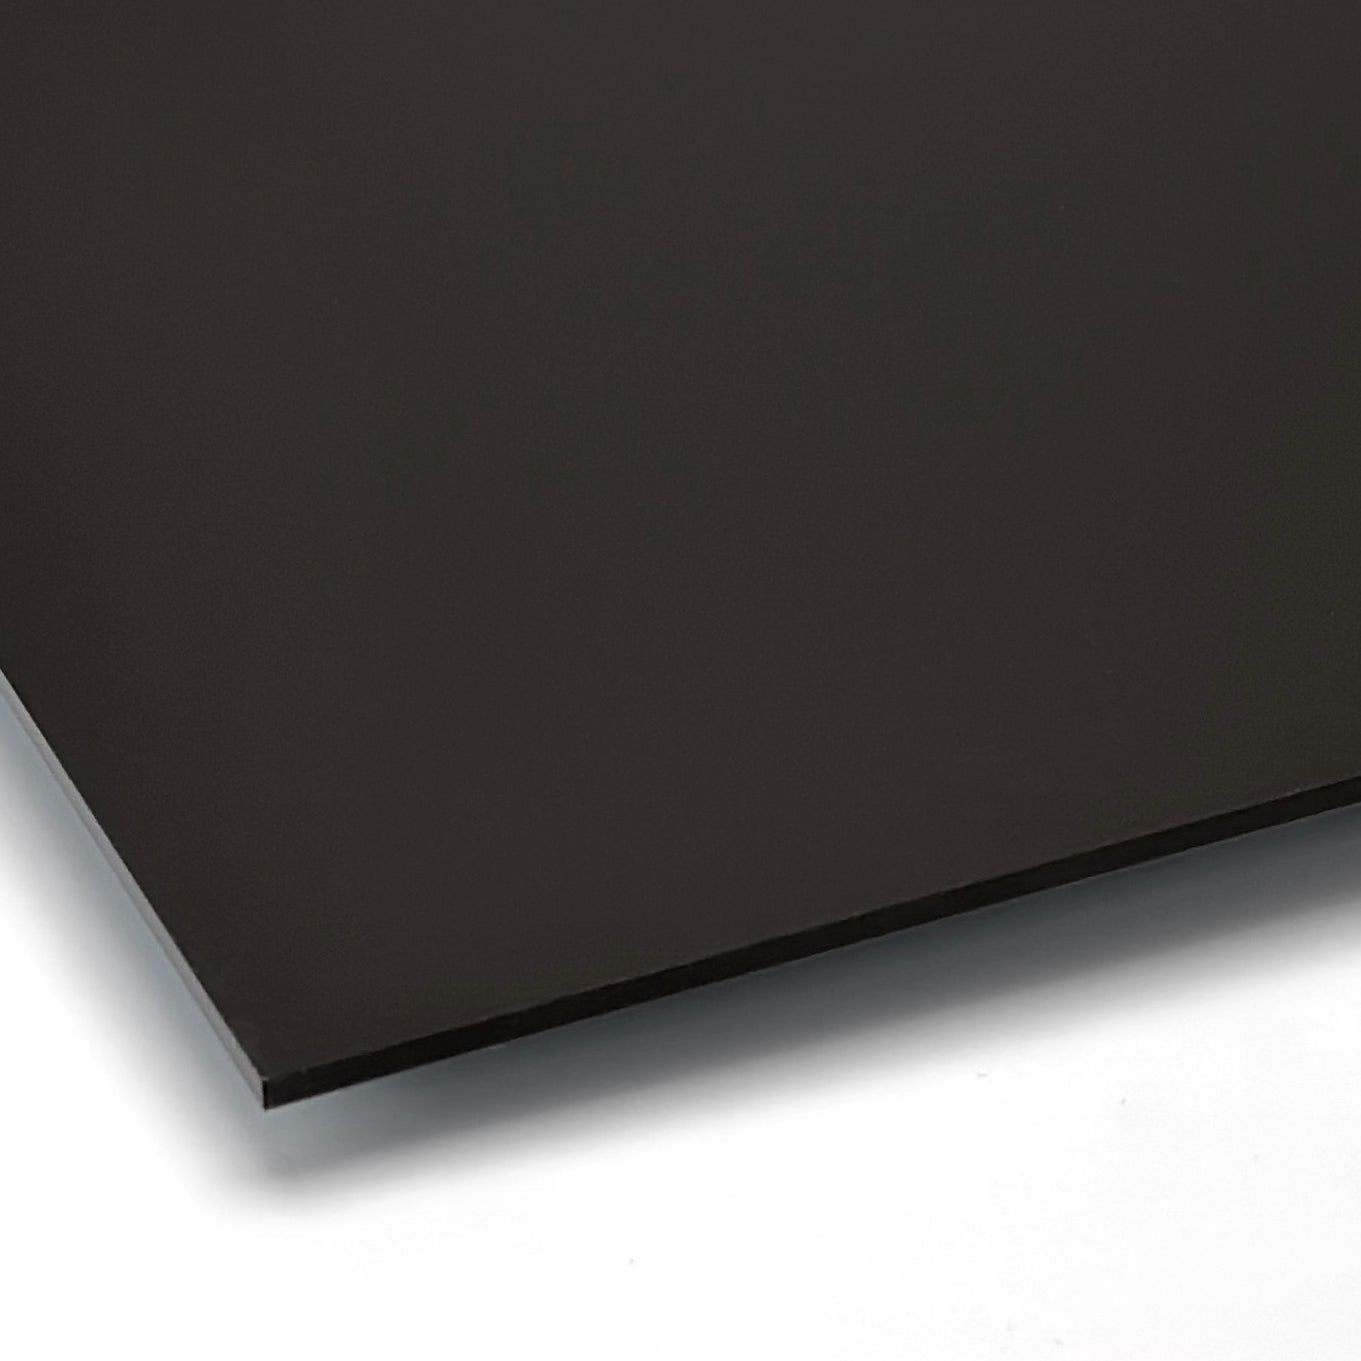 Matte Black Acrylic with laser cutting & printing - 300x200mm